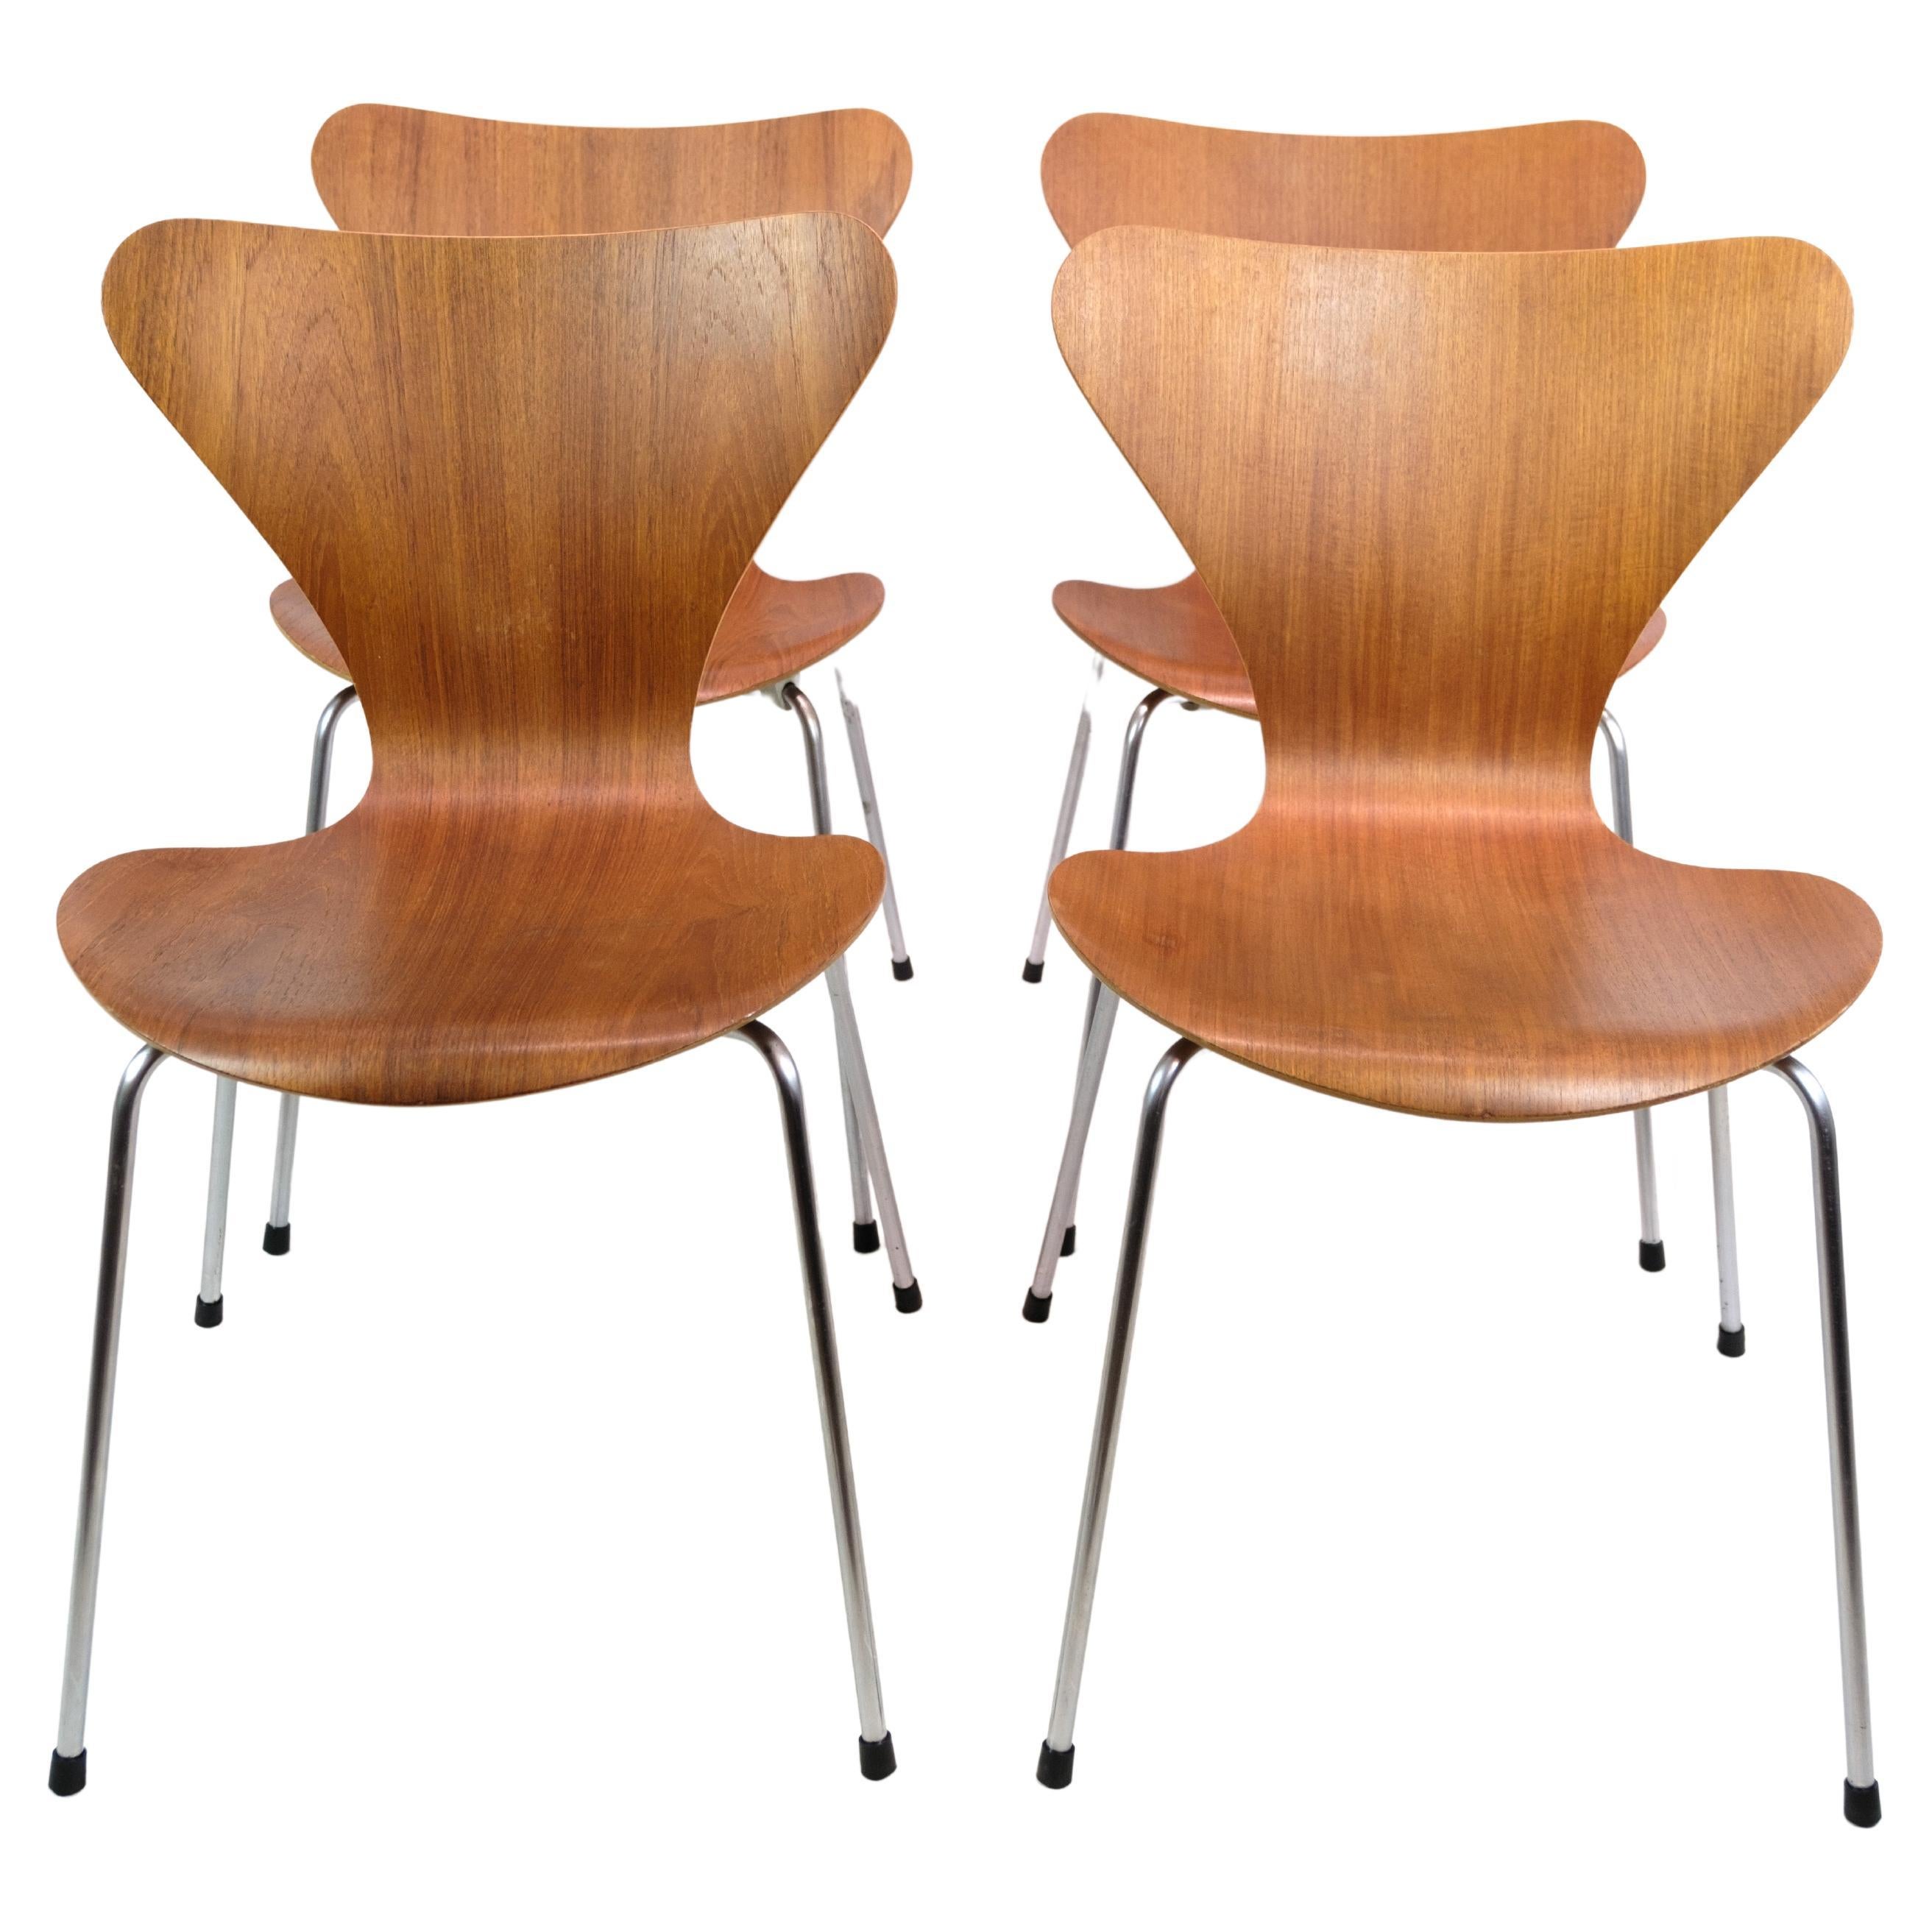 Set of 4 Seven Chairs In Teak wood by Arne Jacobsen and Fritz Hansen from 1960 For Sale